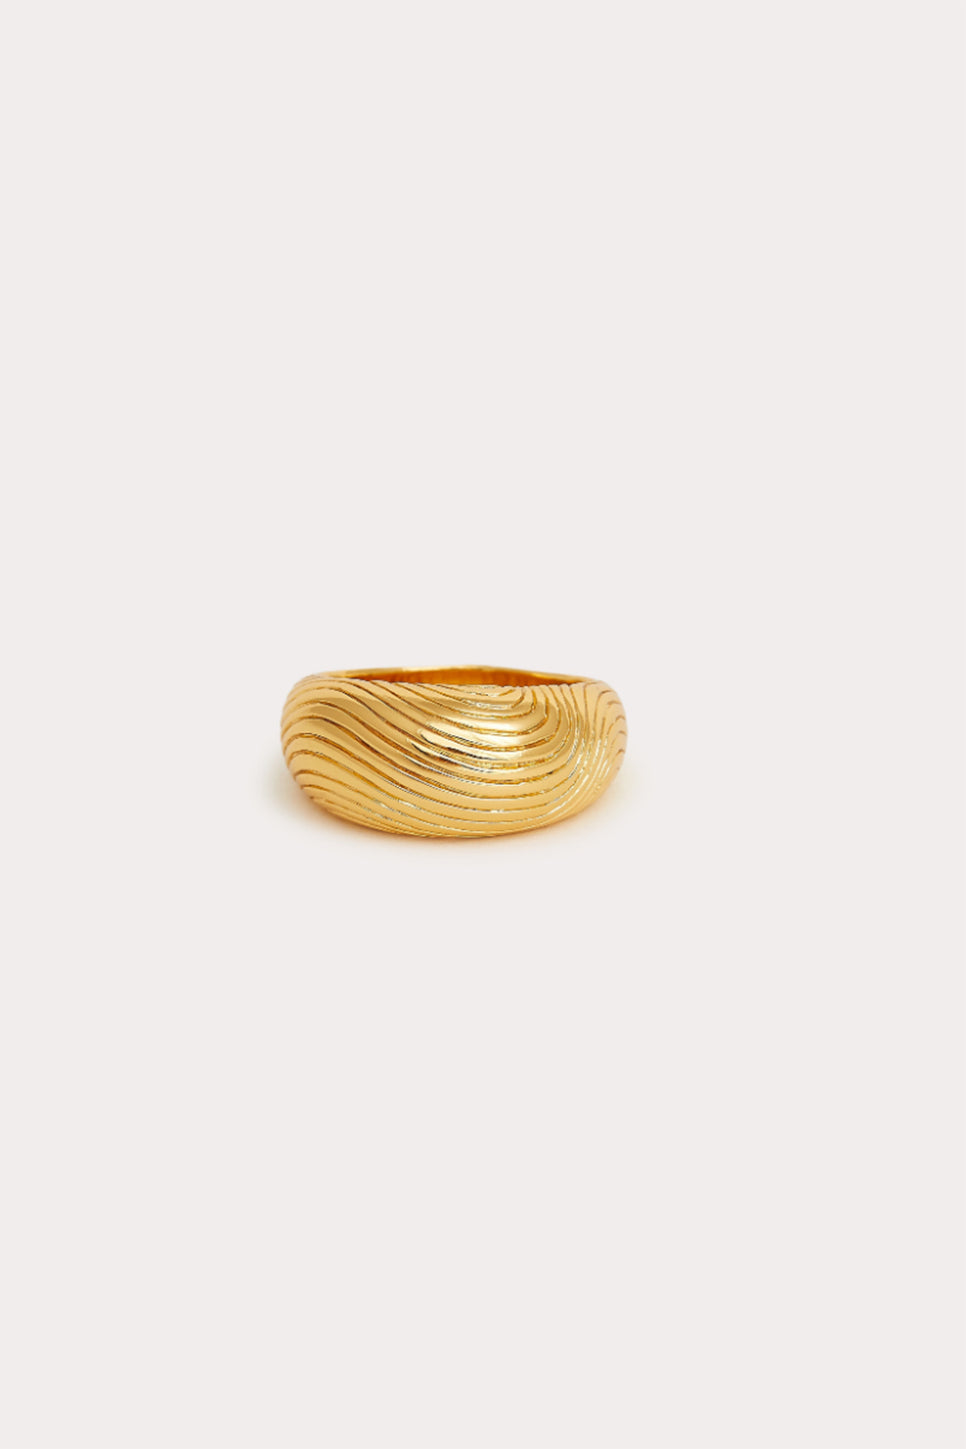 Petit Moments - Grain Dome Ring - Gold